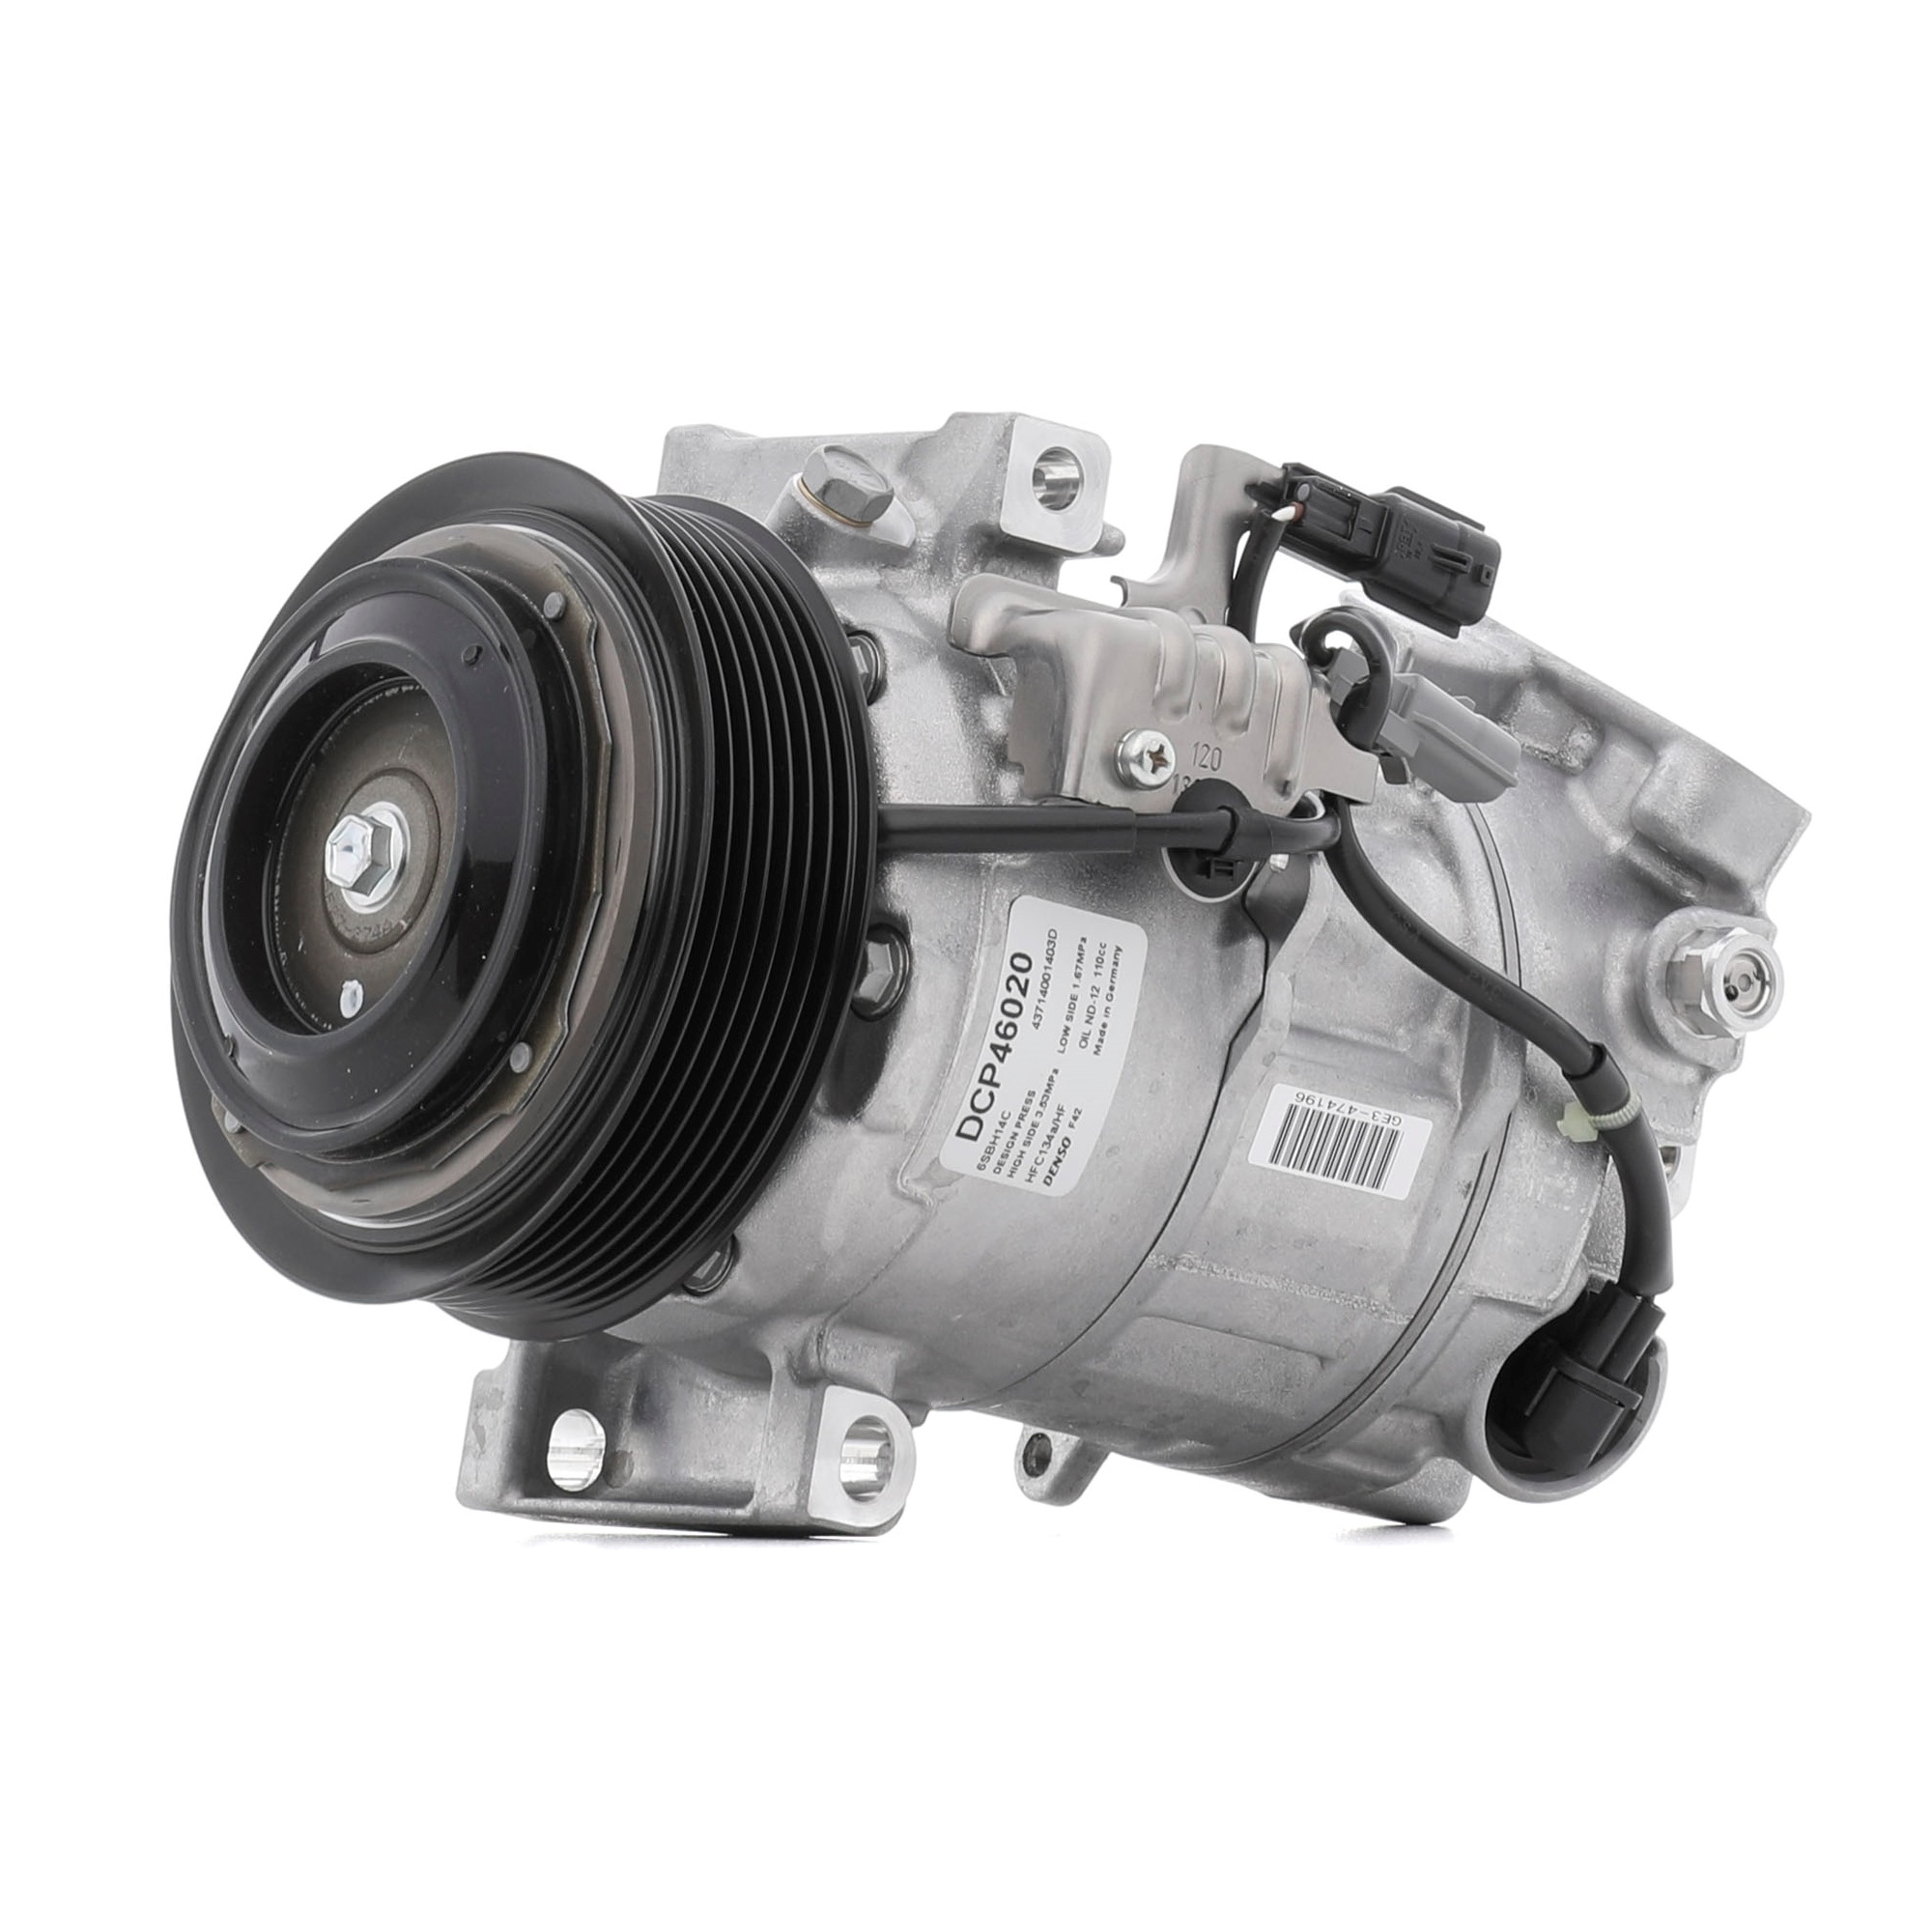 DENSO DCP46020 Air conditioning compressor NISSAN experience and price